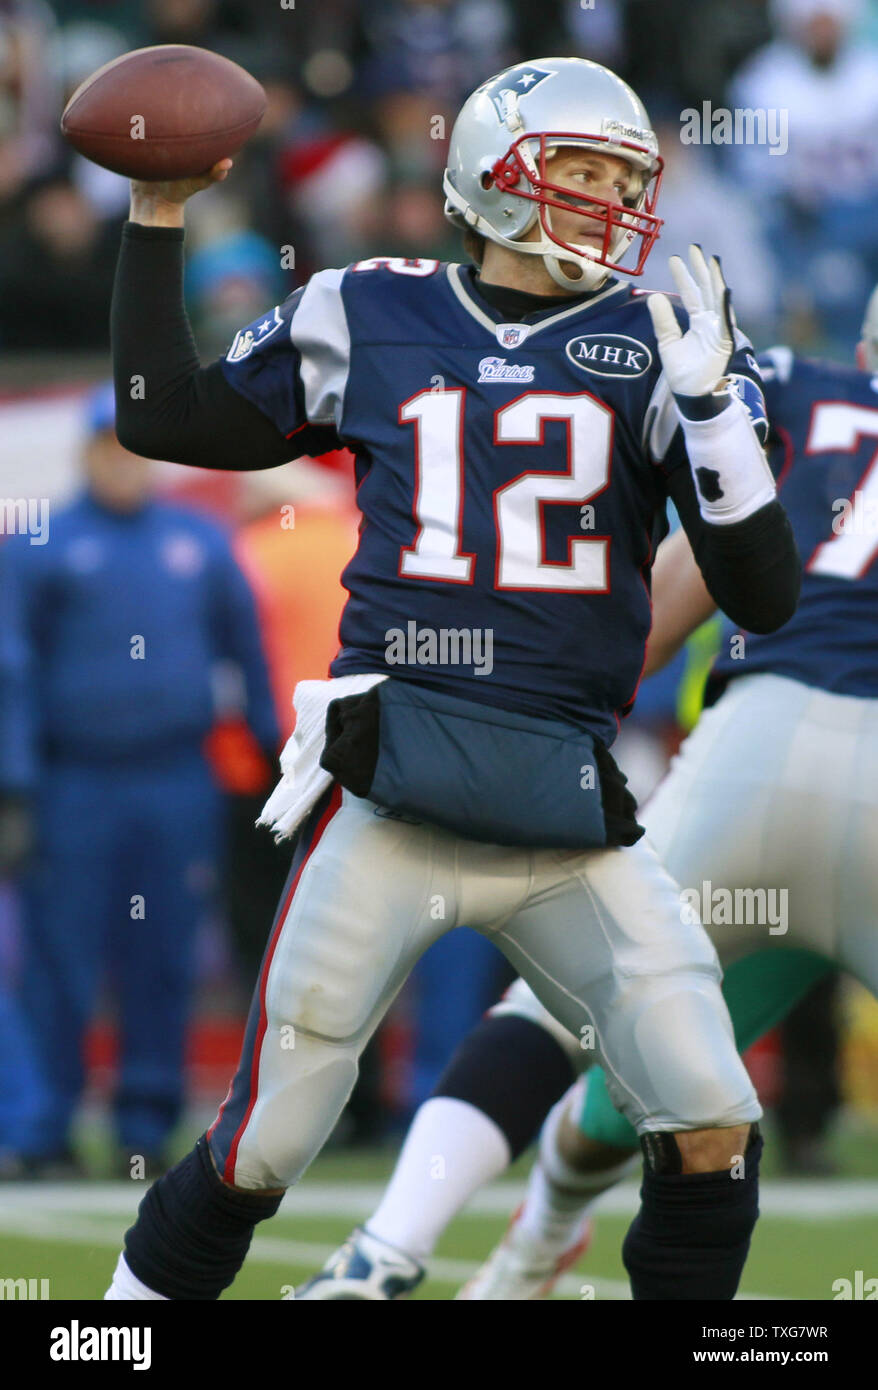 New England Patriots quarterback Tom Brady throws a pass in the second quarter against the Miami Dolphins at Gillette Stadium in Foxboro, Massachusetts on December 24, 2011.  UPI/Matthew Healey Stock Photo